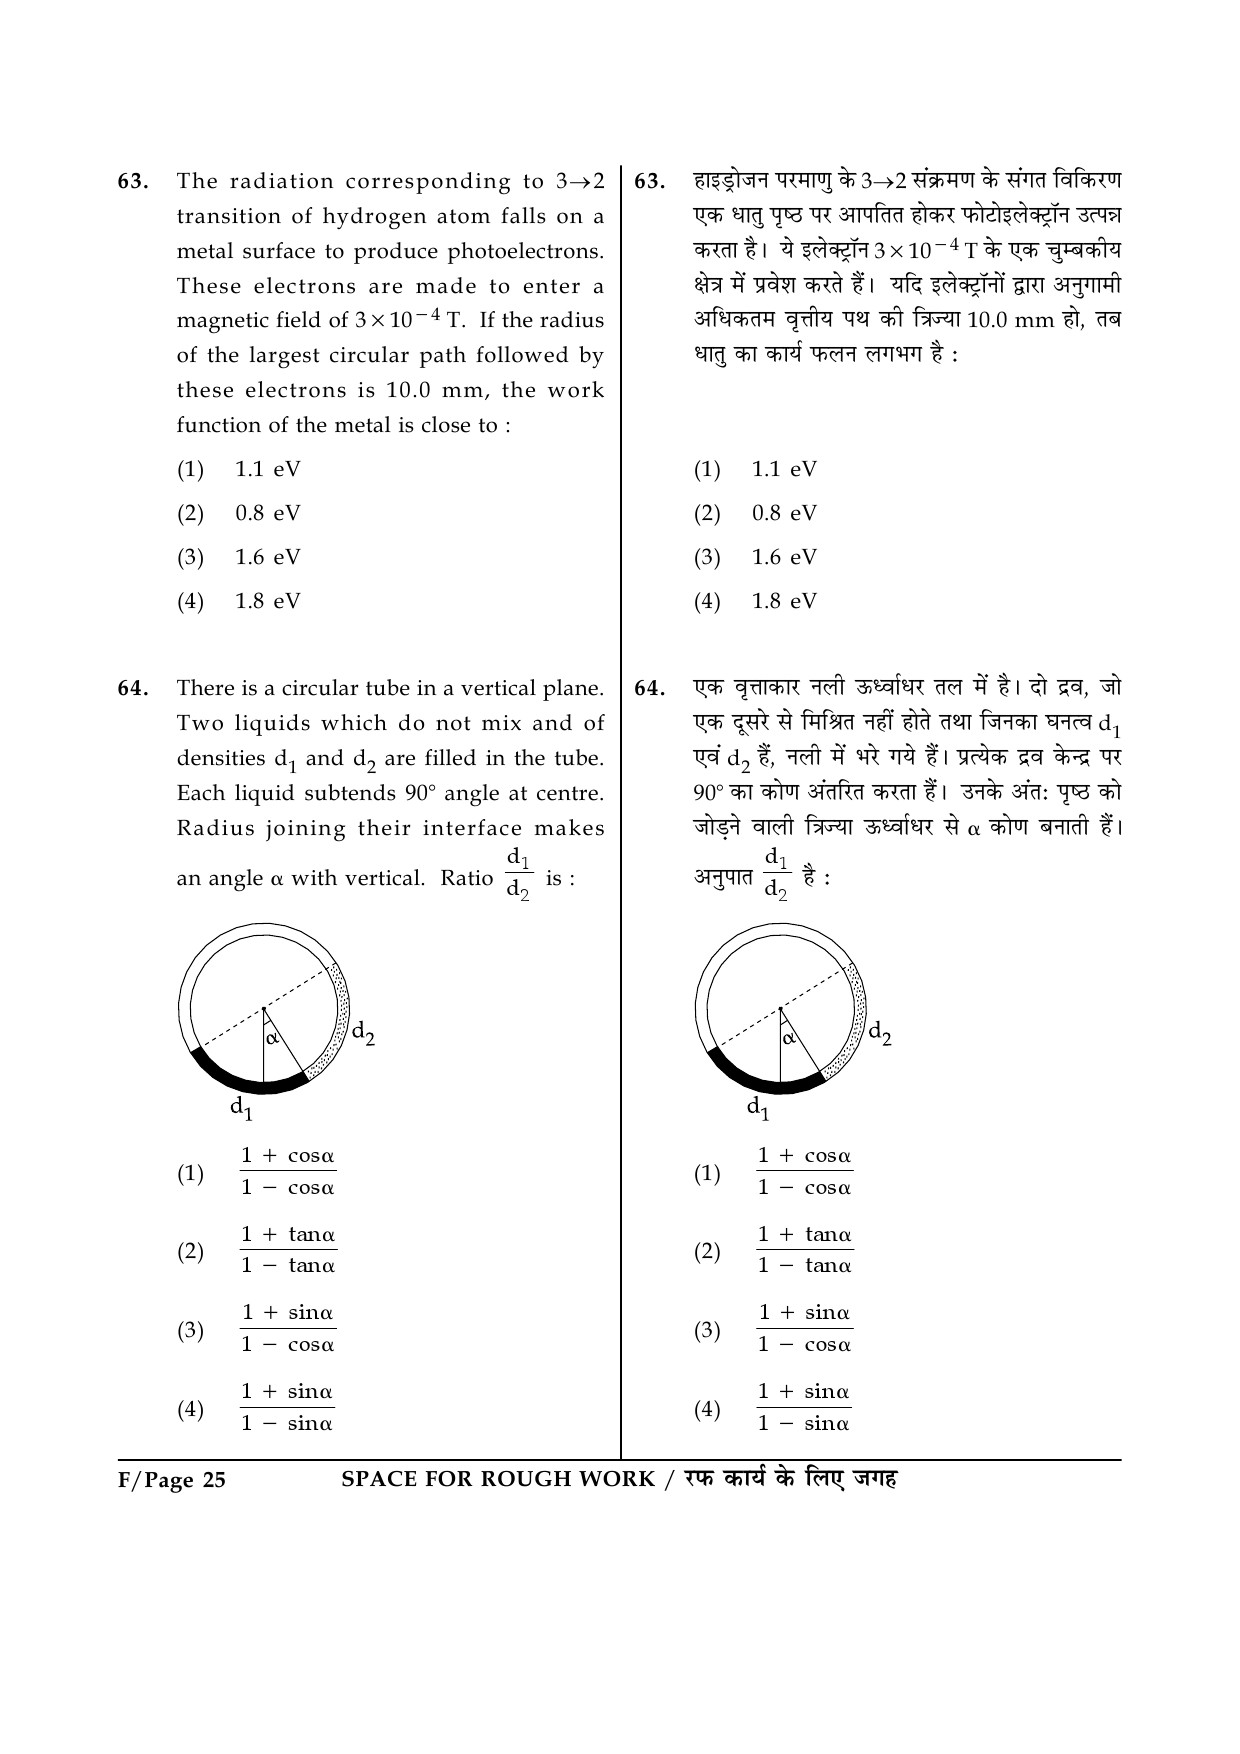 JEE Main Exam Question Paper 2014 Booklet F 25